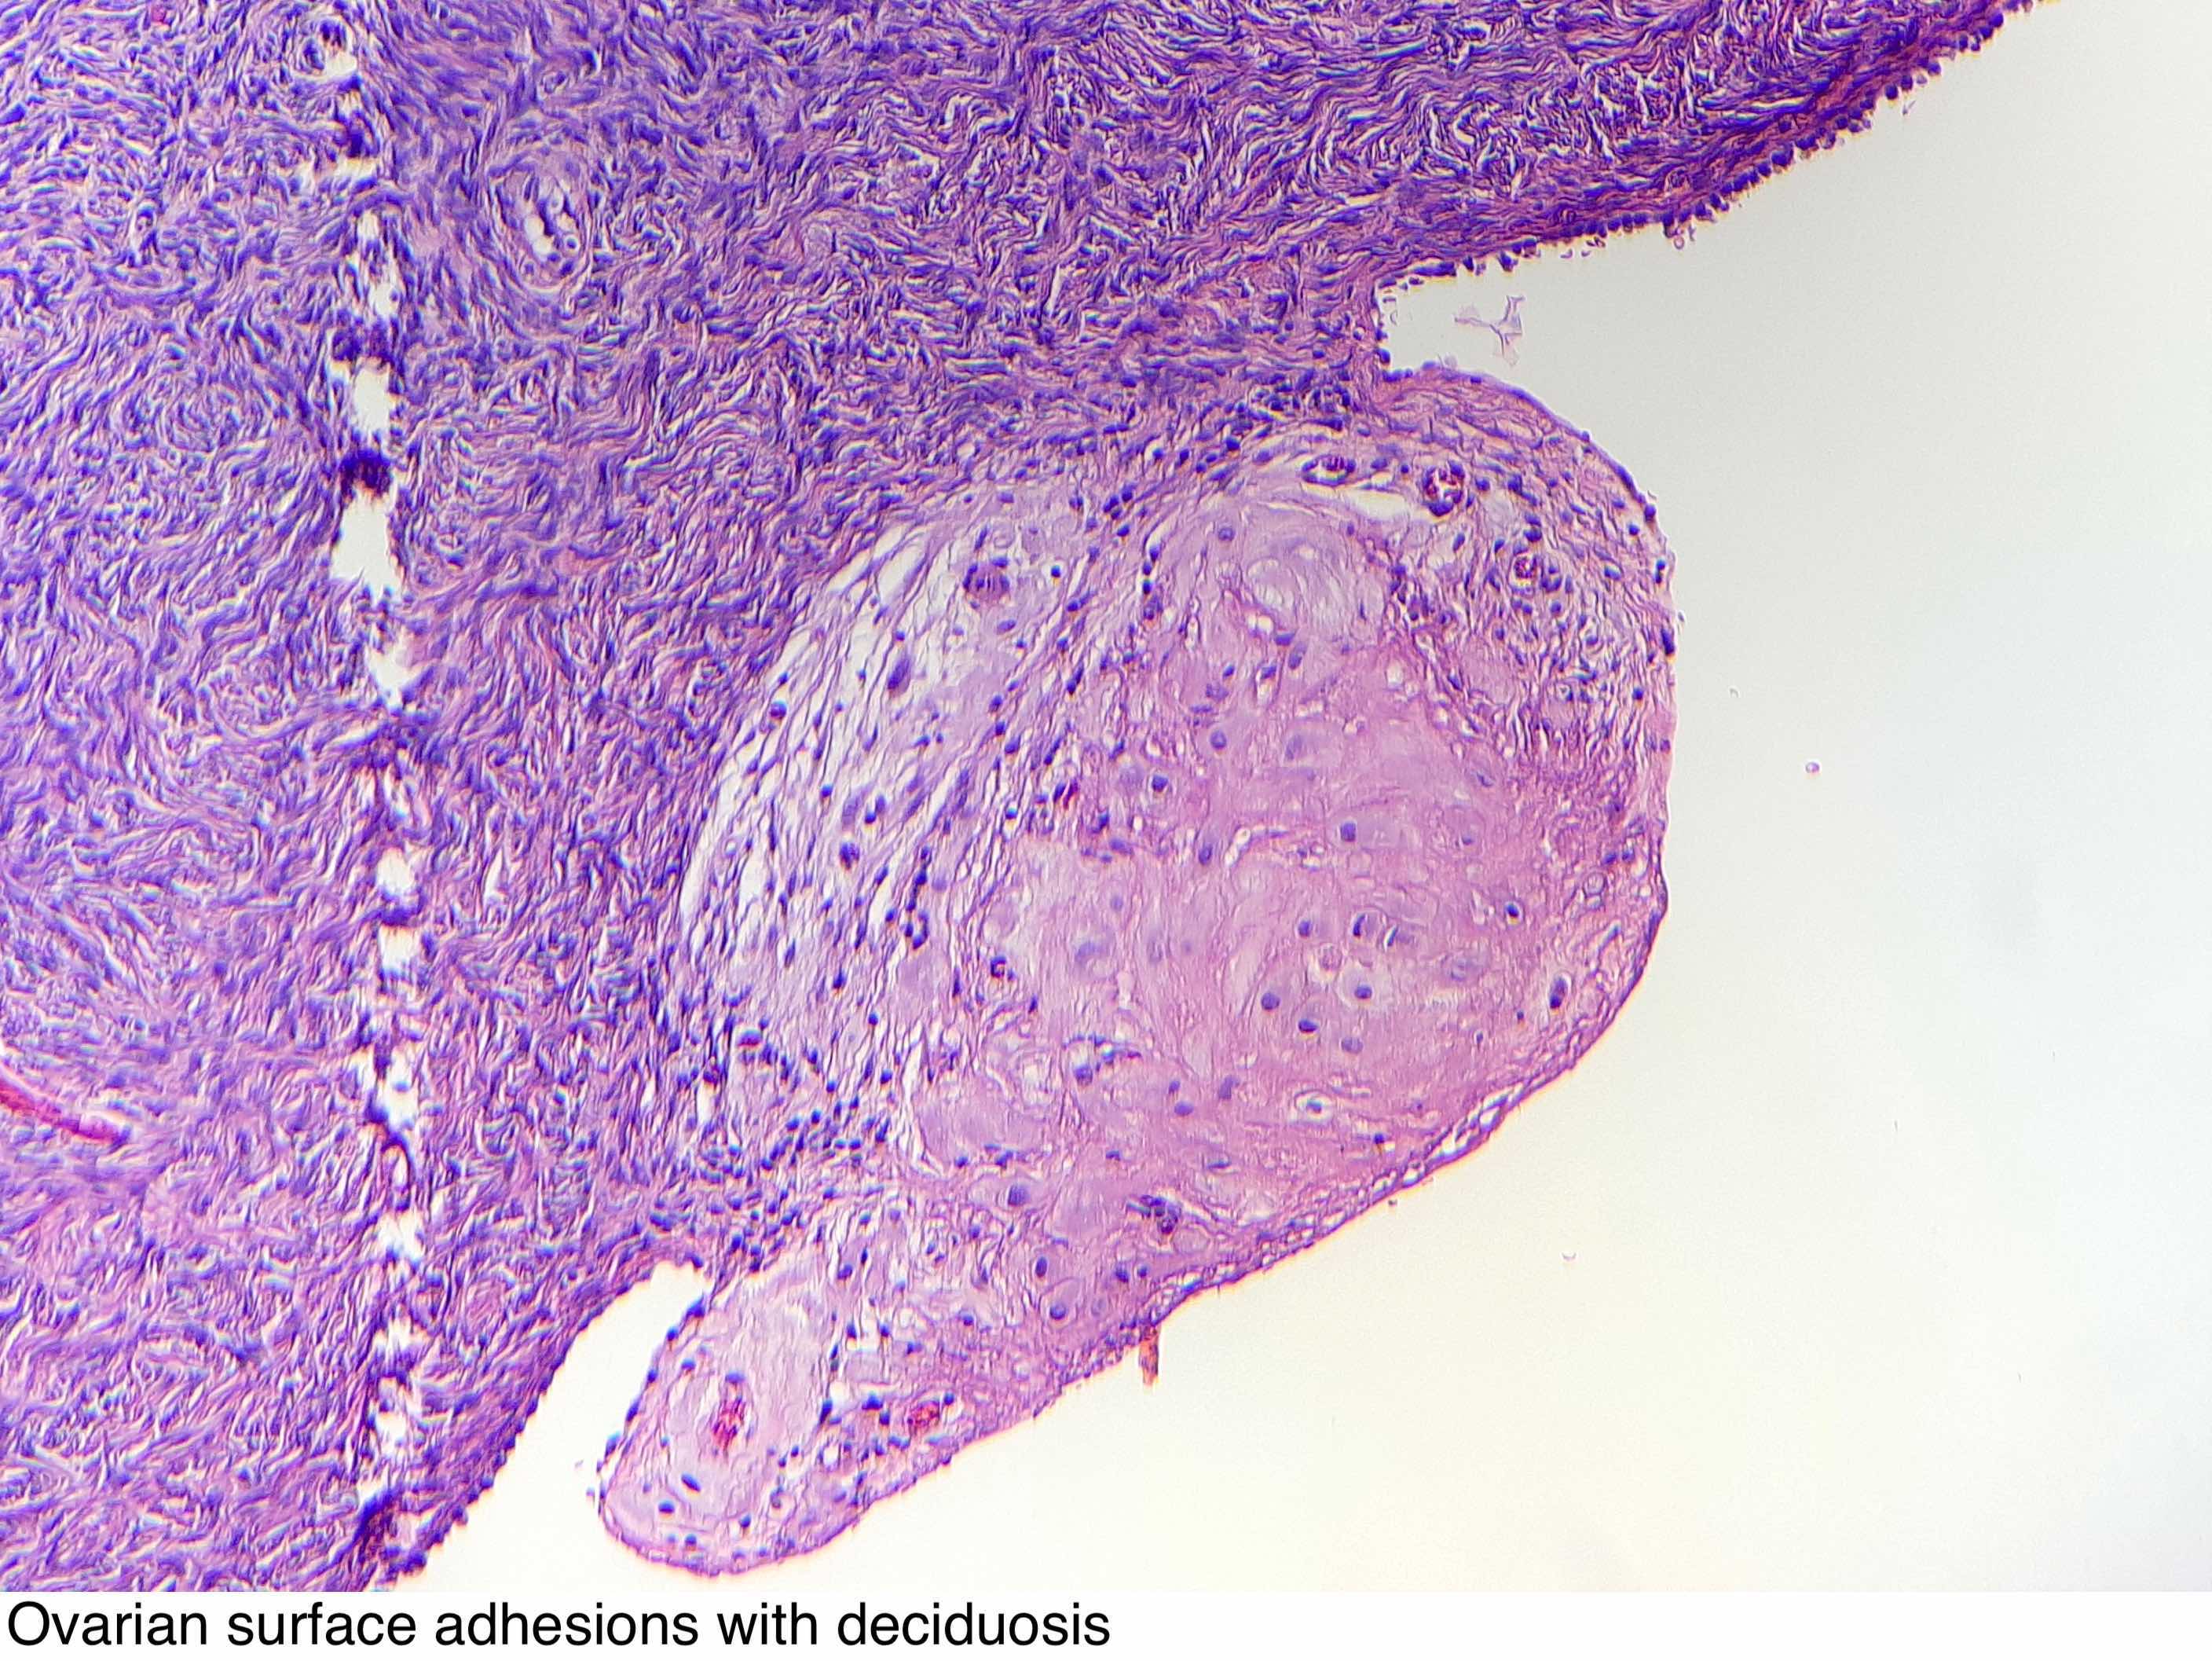 Ovarian surface adhesions with deciduosis.